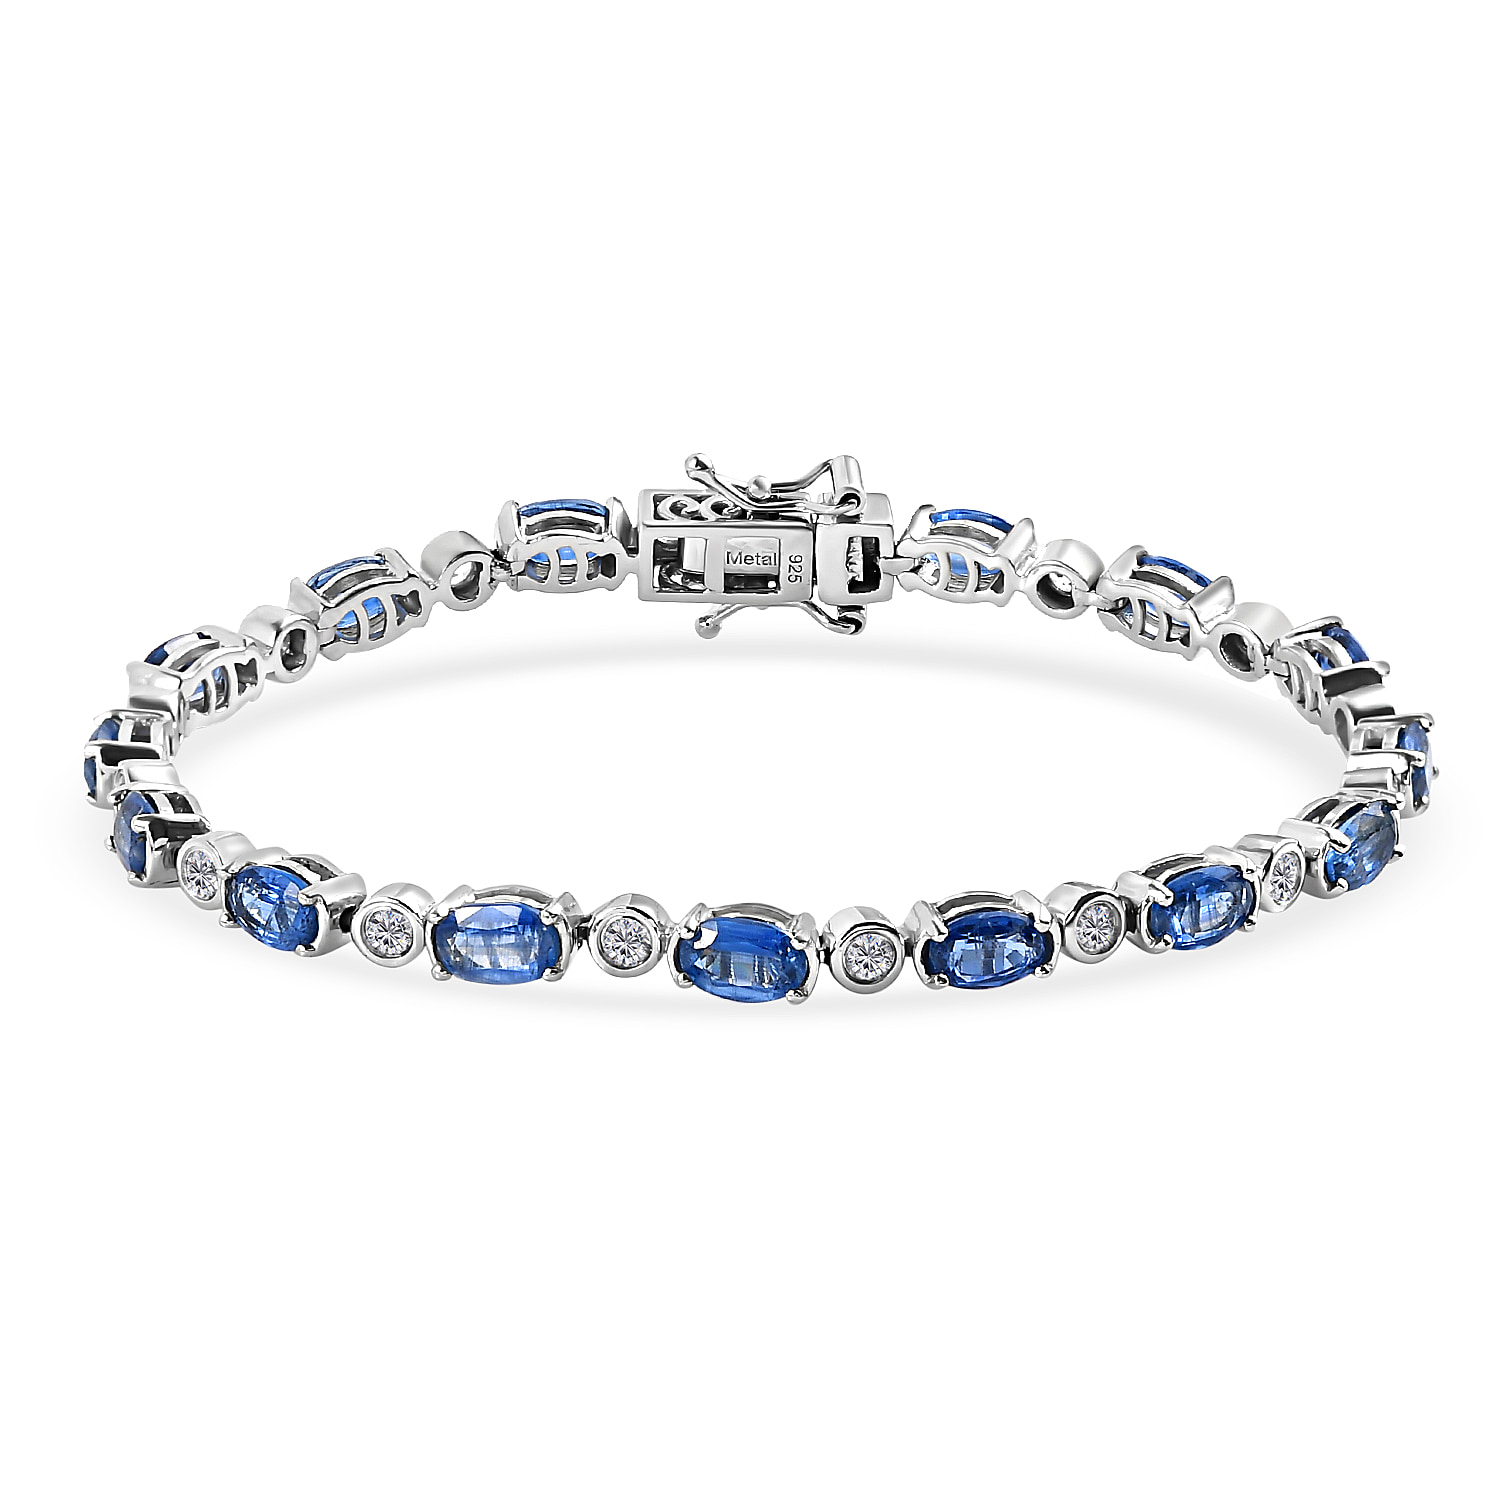 Tennis Kyanite Bracelet Size 7 with Natural Cambodian Zircon in Sterling Silver 9.01 Ct., Silver Wt. 11.02 Gms